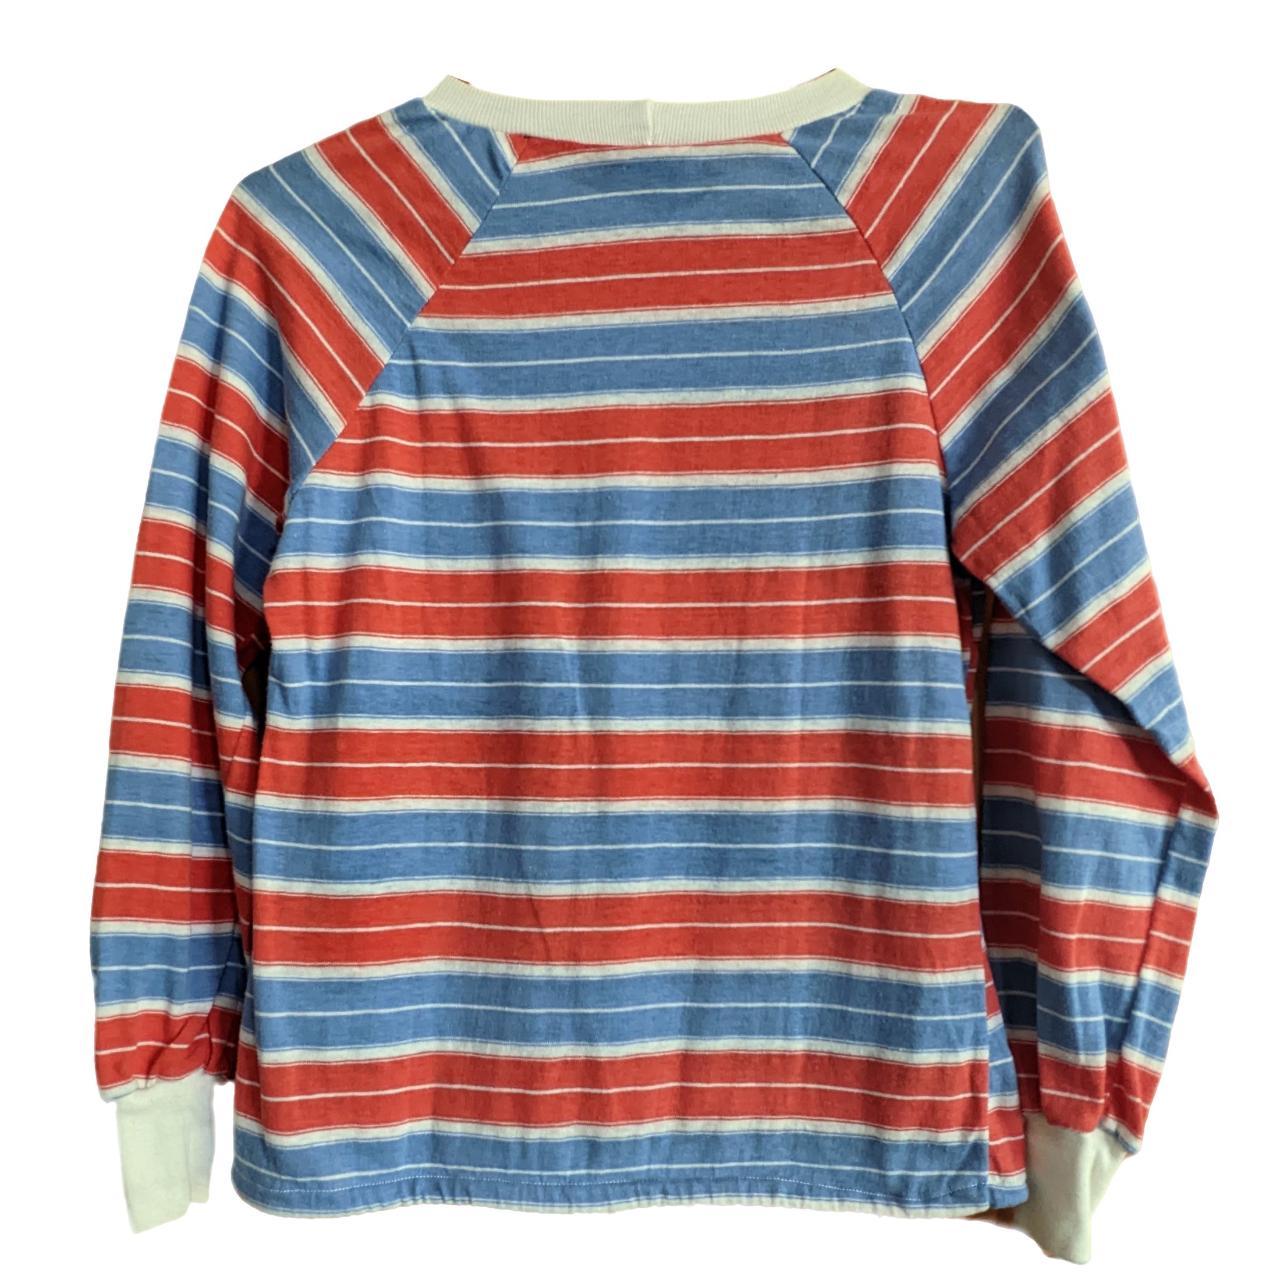 Sears Women's Blue and Red Jumper (2)